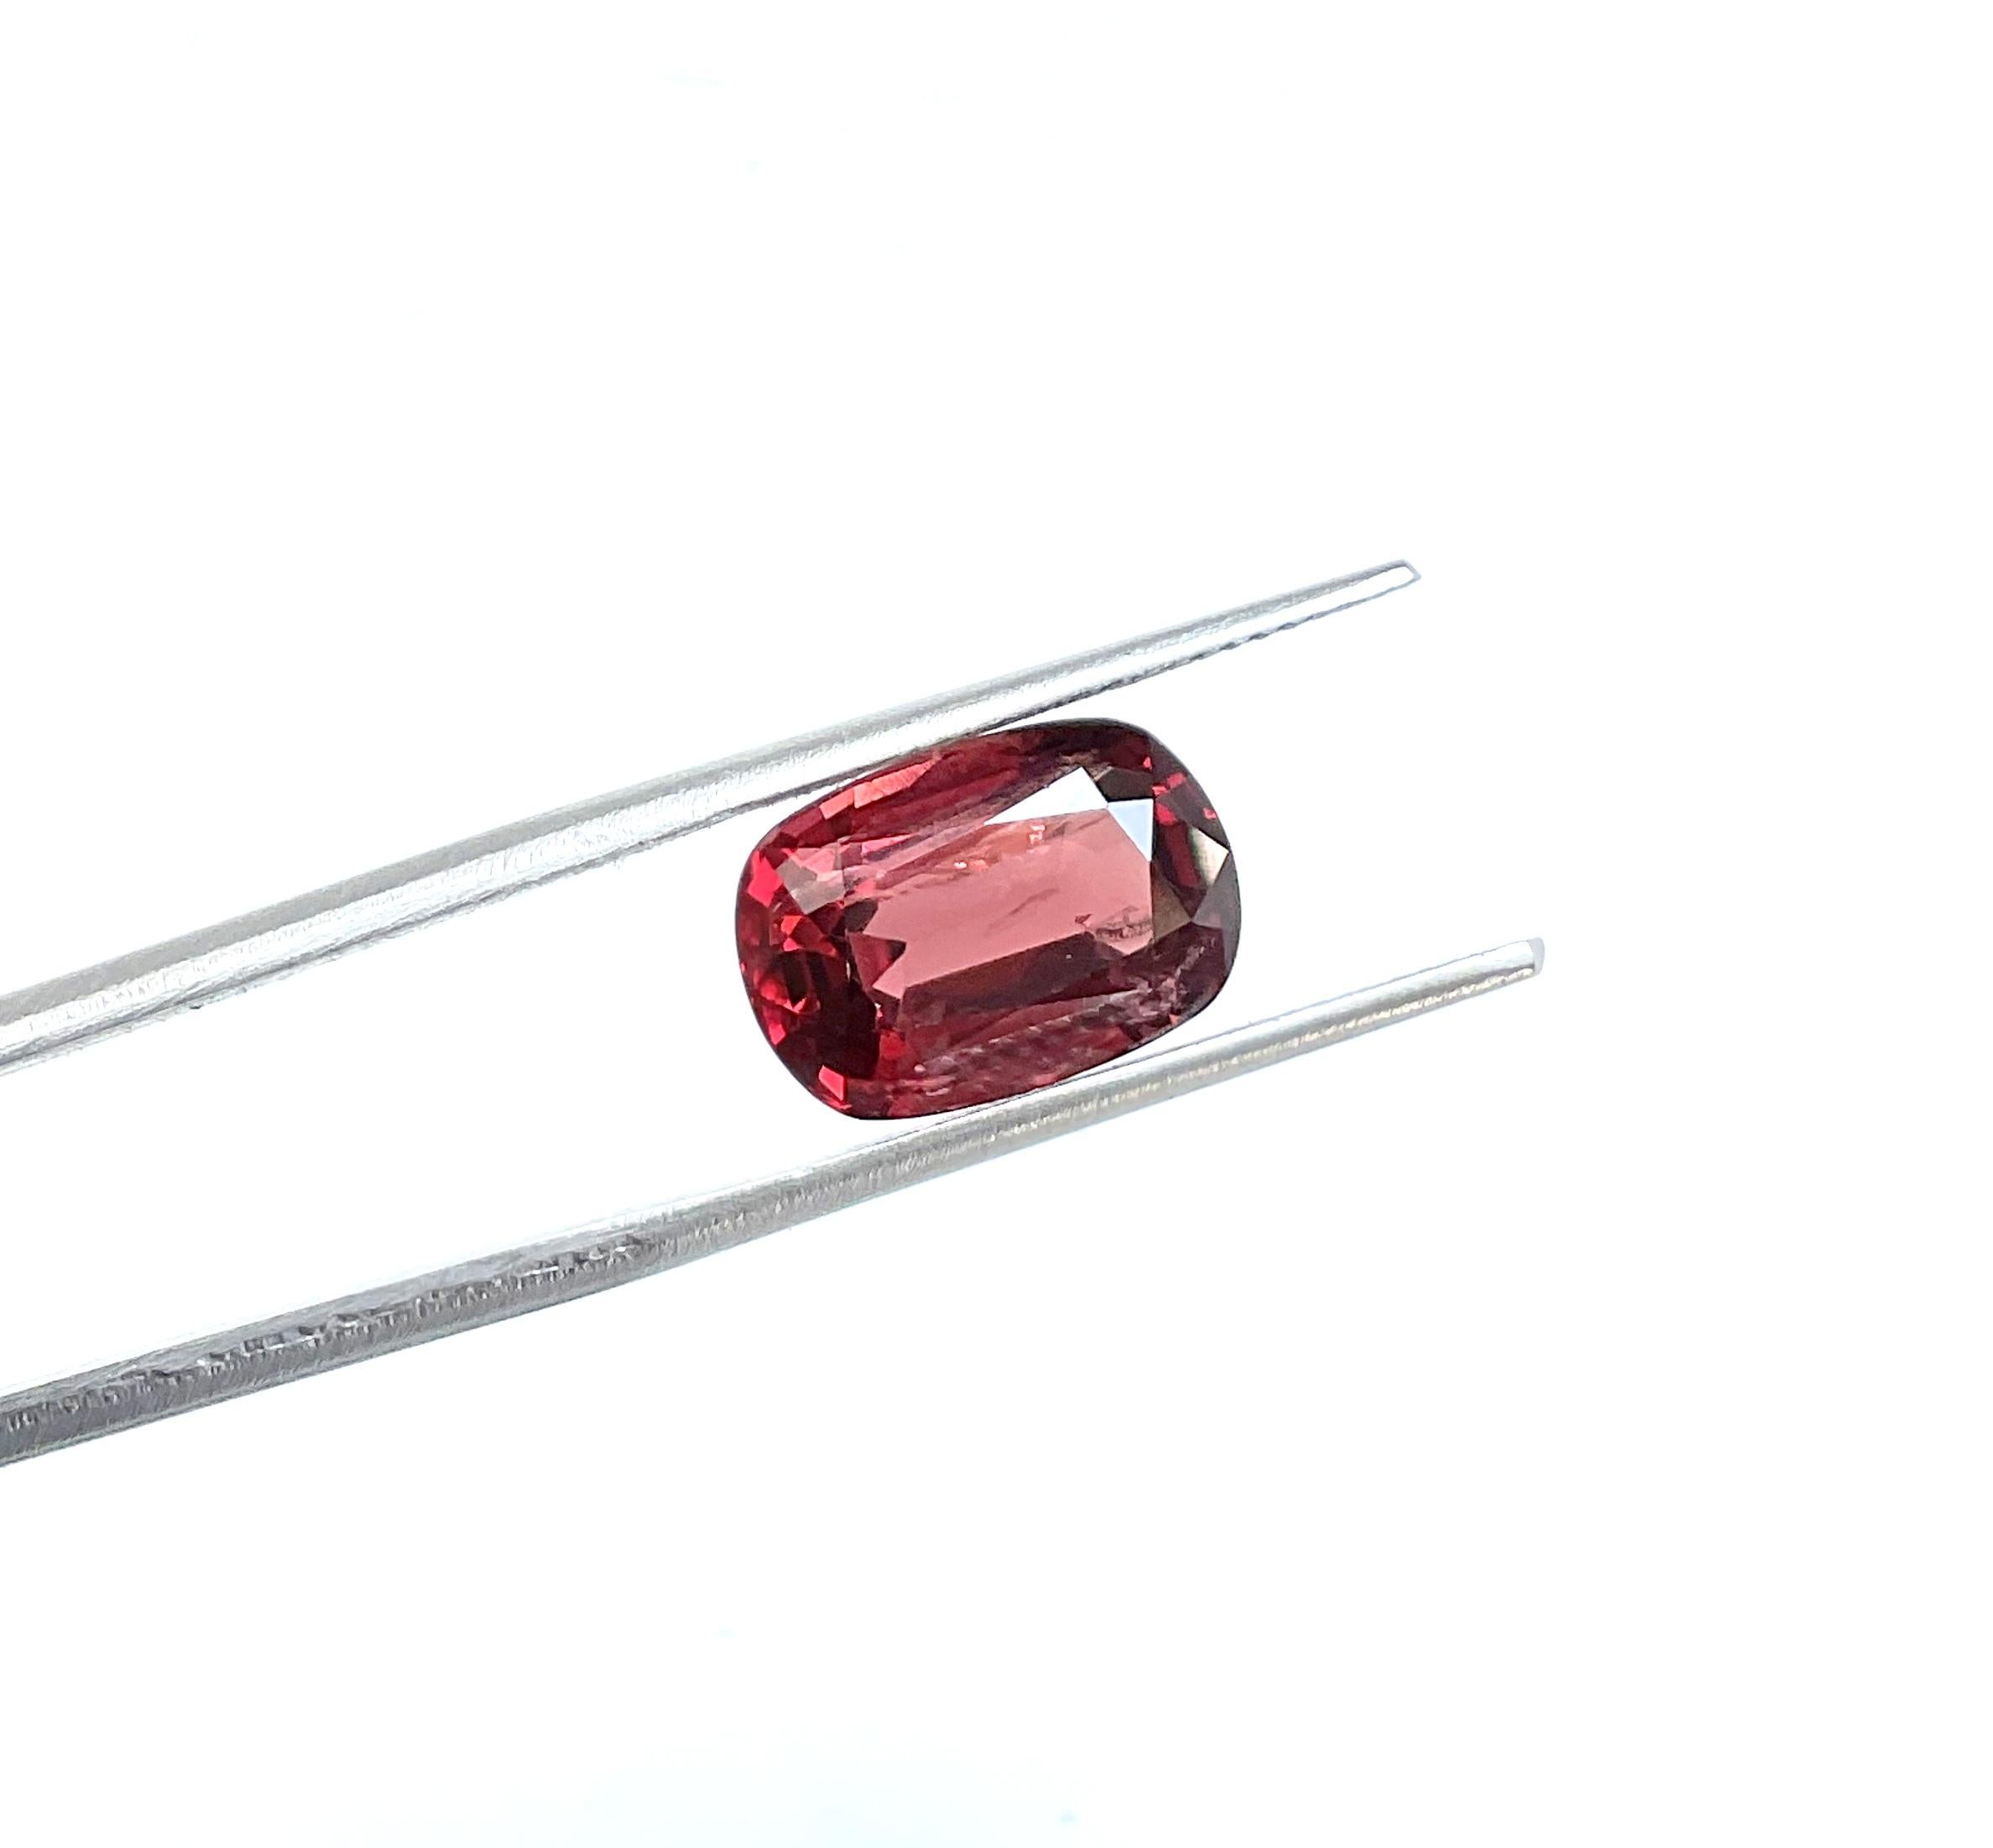 6.40 Carats orangy red burmese spinel cutstone oval for ring natural gemstone

Weight: 6.40 Carats
Size: 13x9x6 MM
Pieces: 1
Shape : cushion